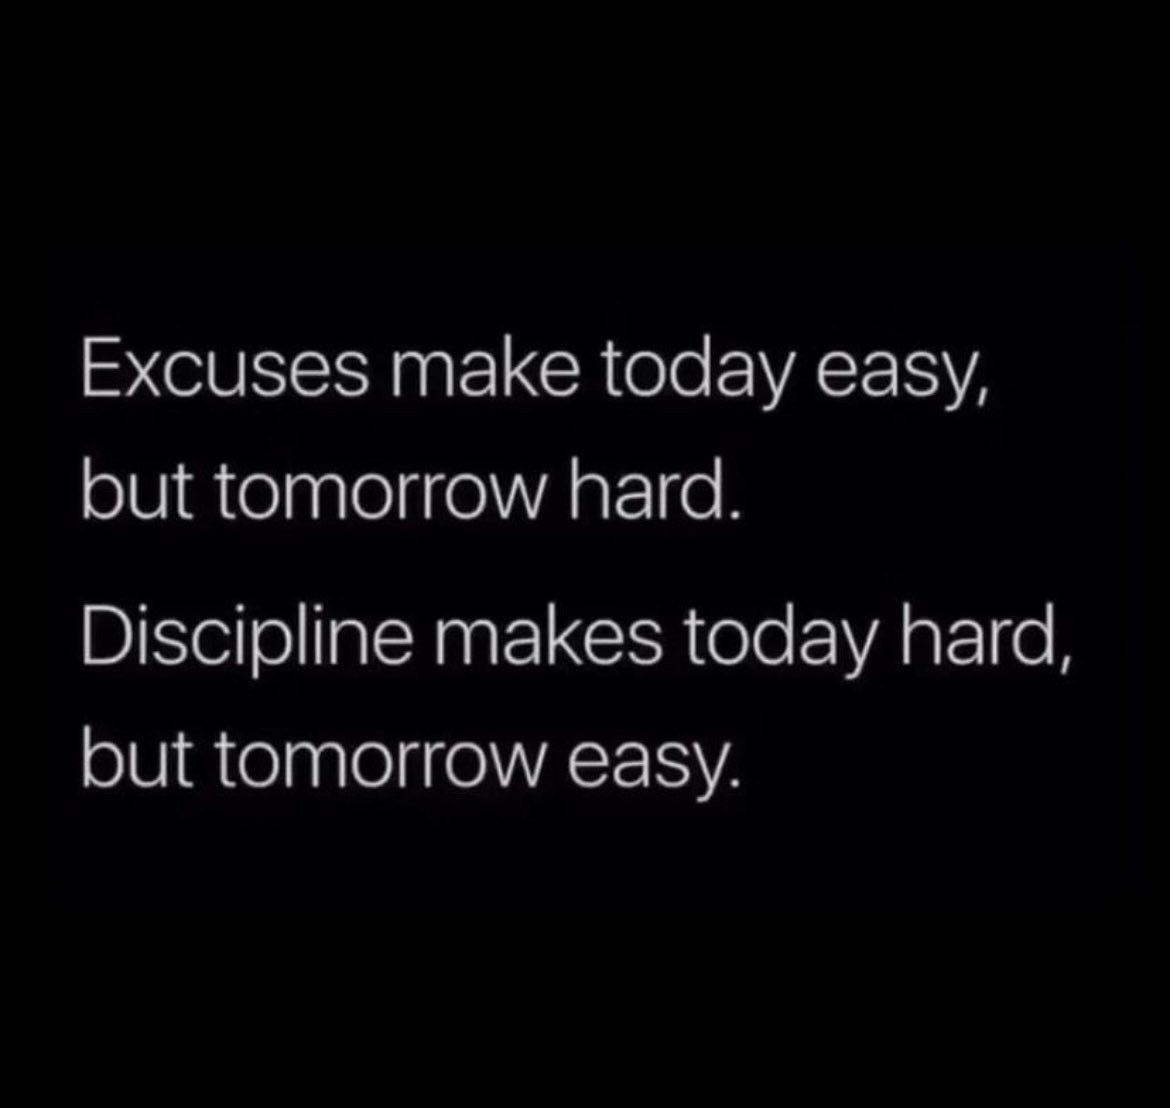 For some it’s so much easier to make excuses today only to find out later down the road how difficult the journey has become. Exercising discipline is difficult for some but for those who apply it, life gives way to greater successes. Choose wisely your path.  #ItsTimeToManUp